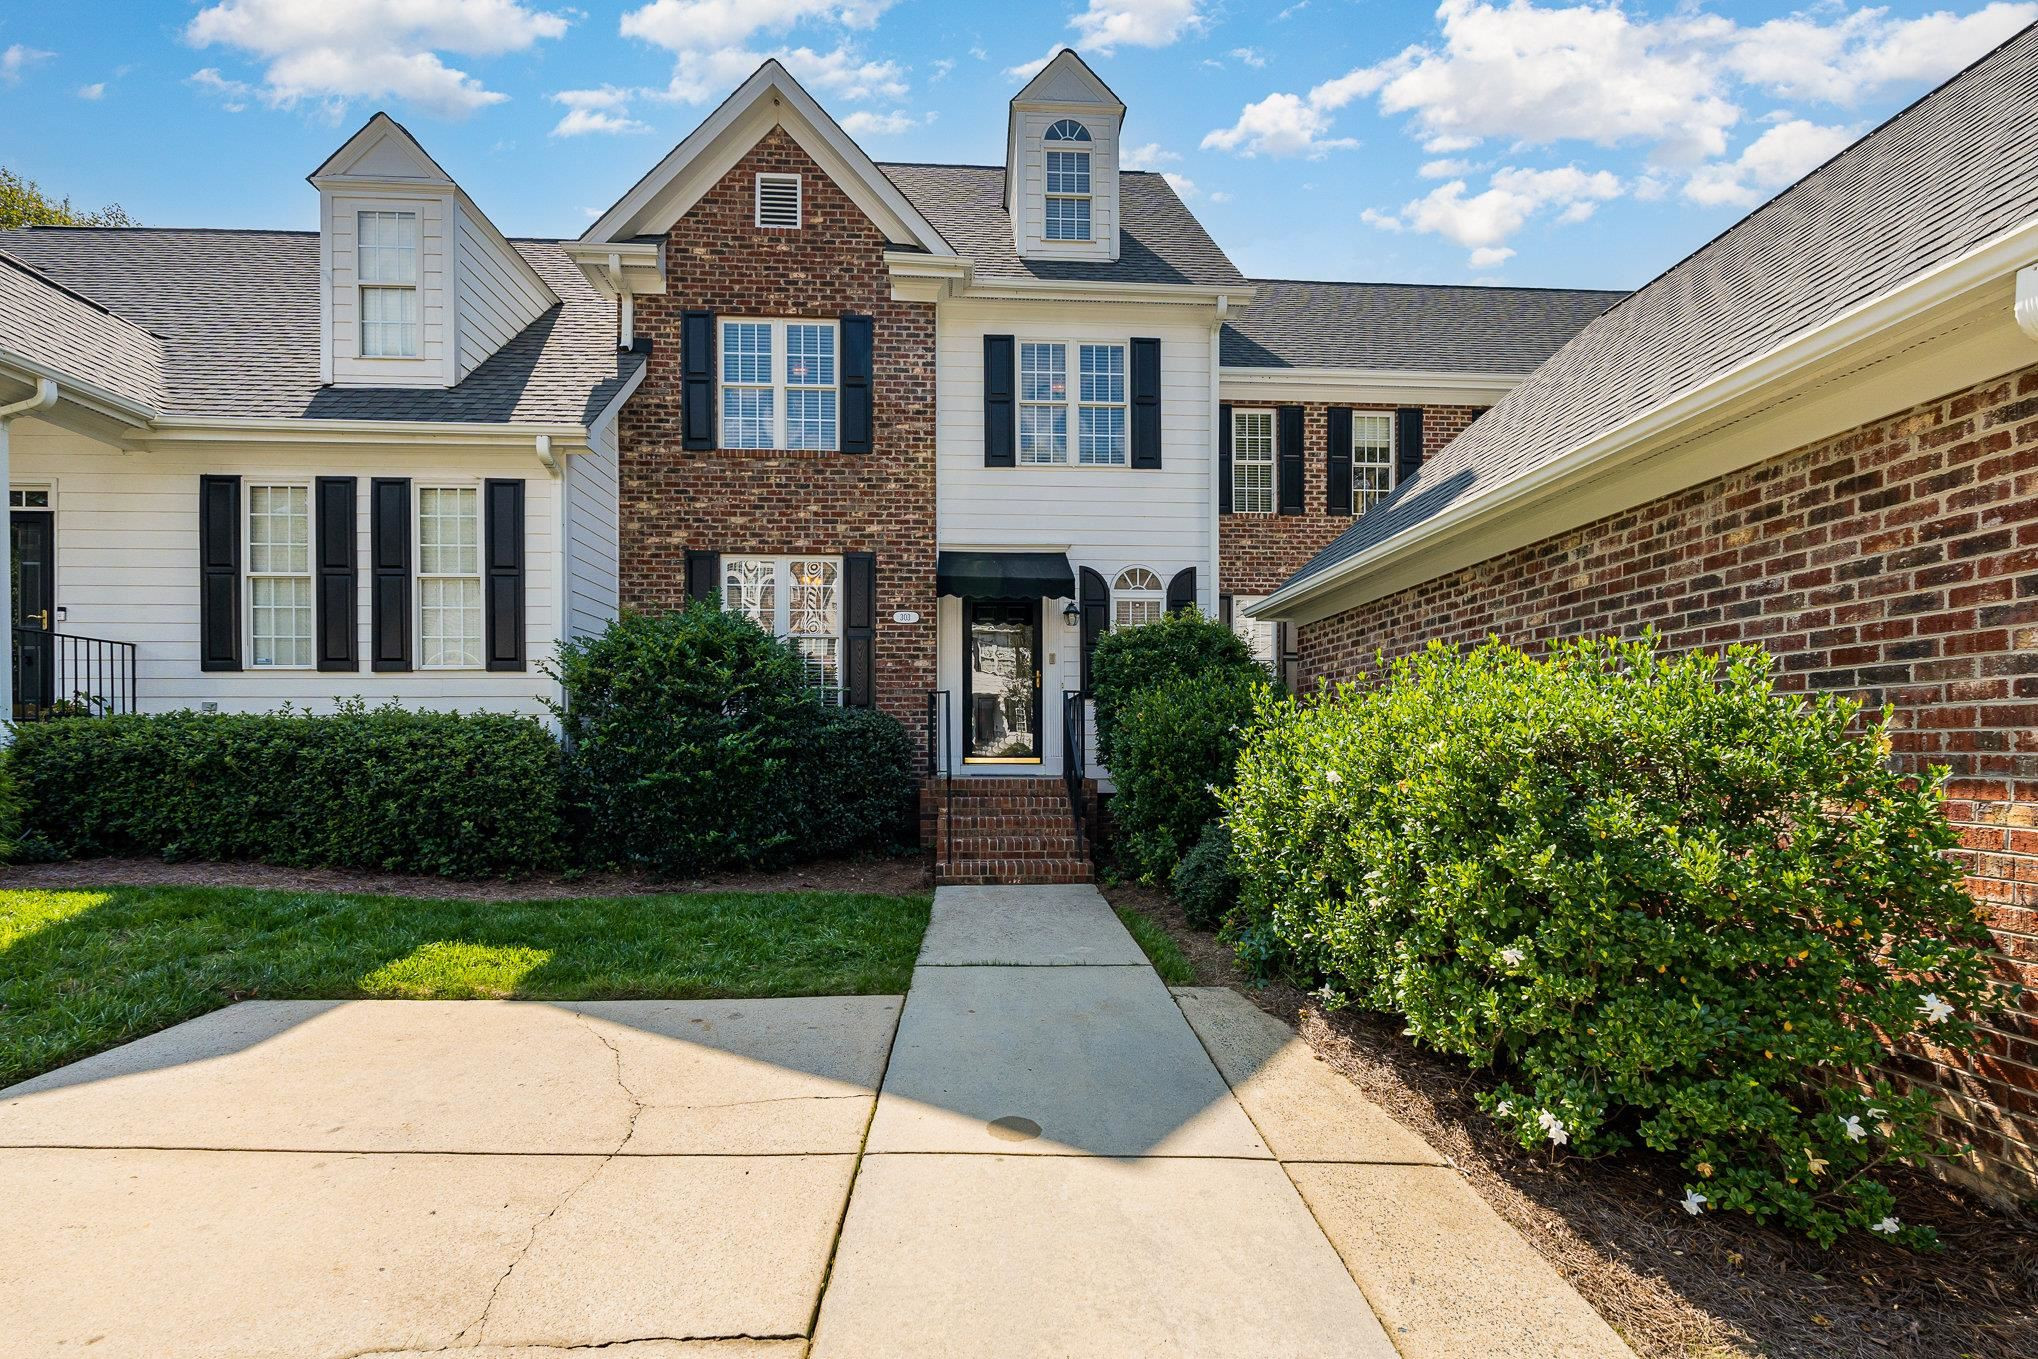 View Durham, NC 27712 townhome